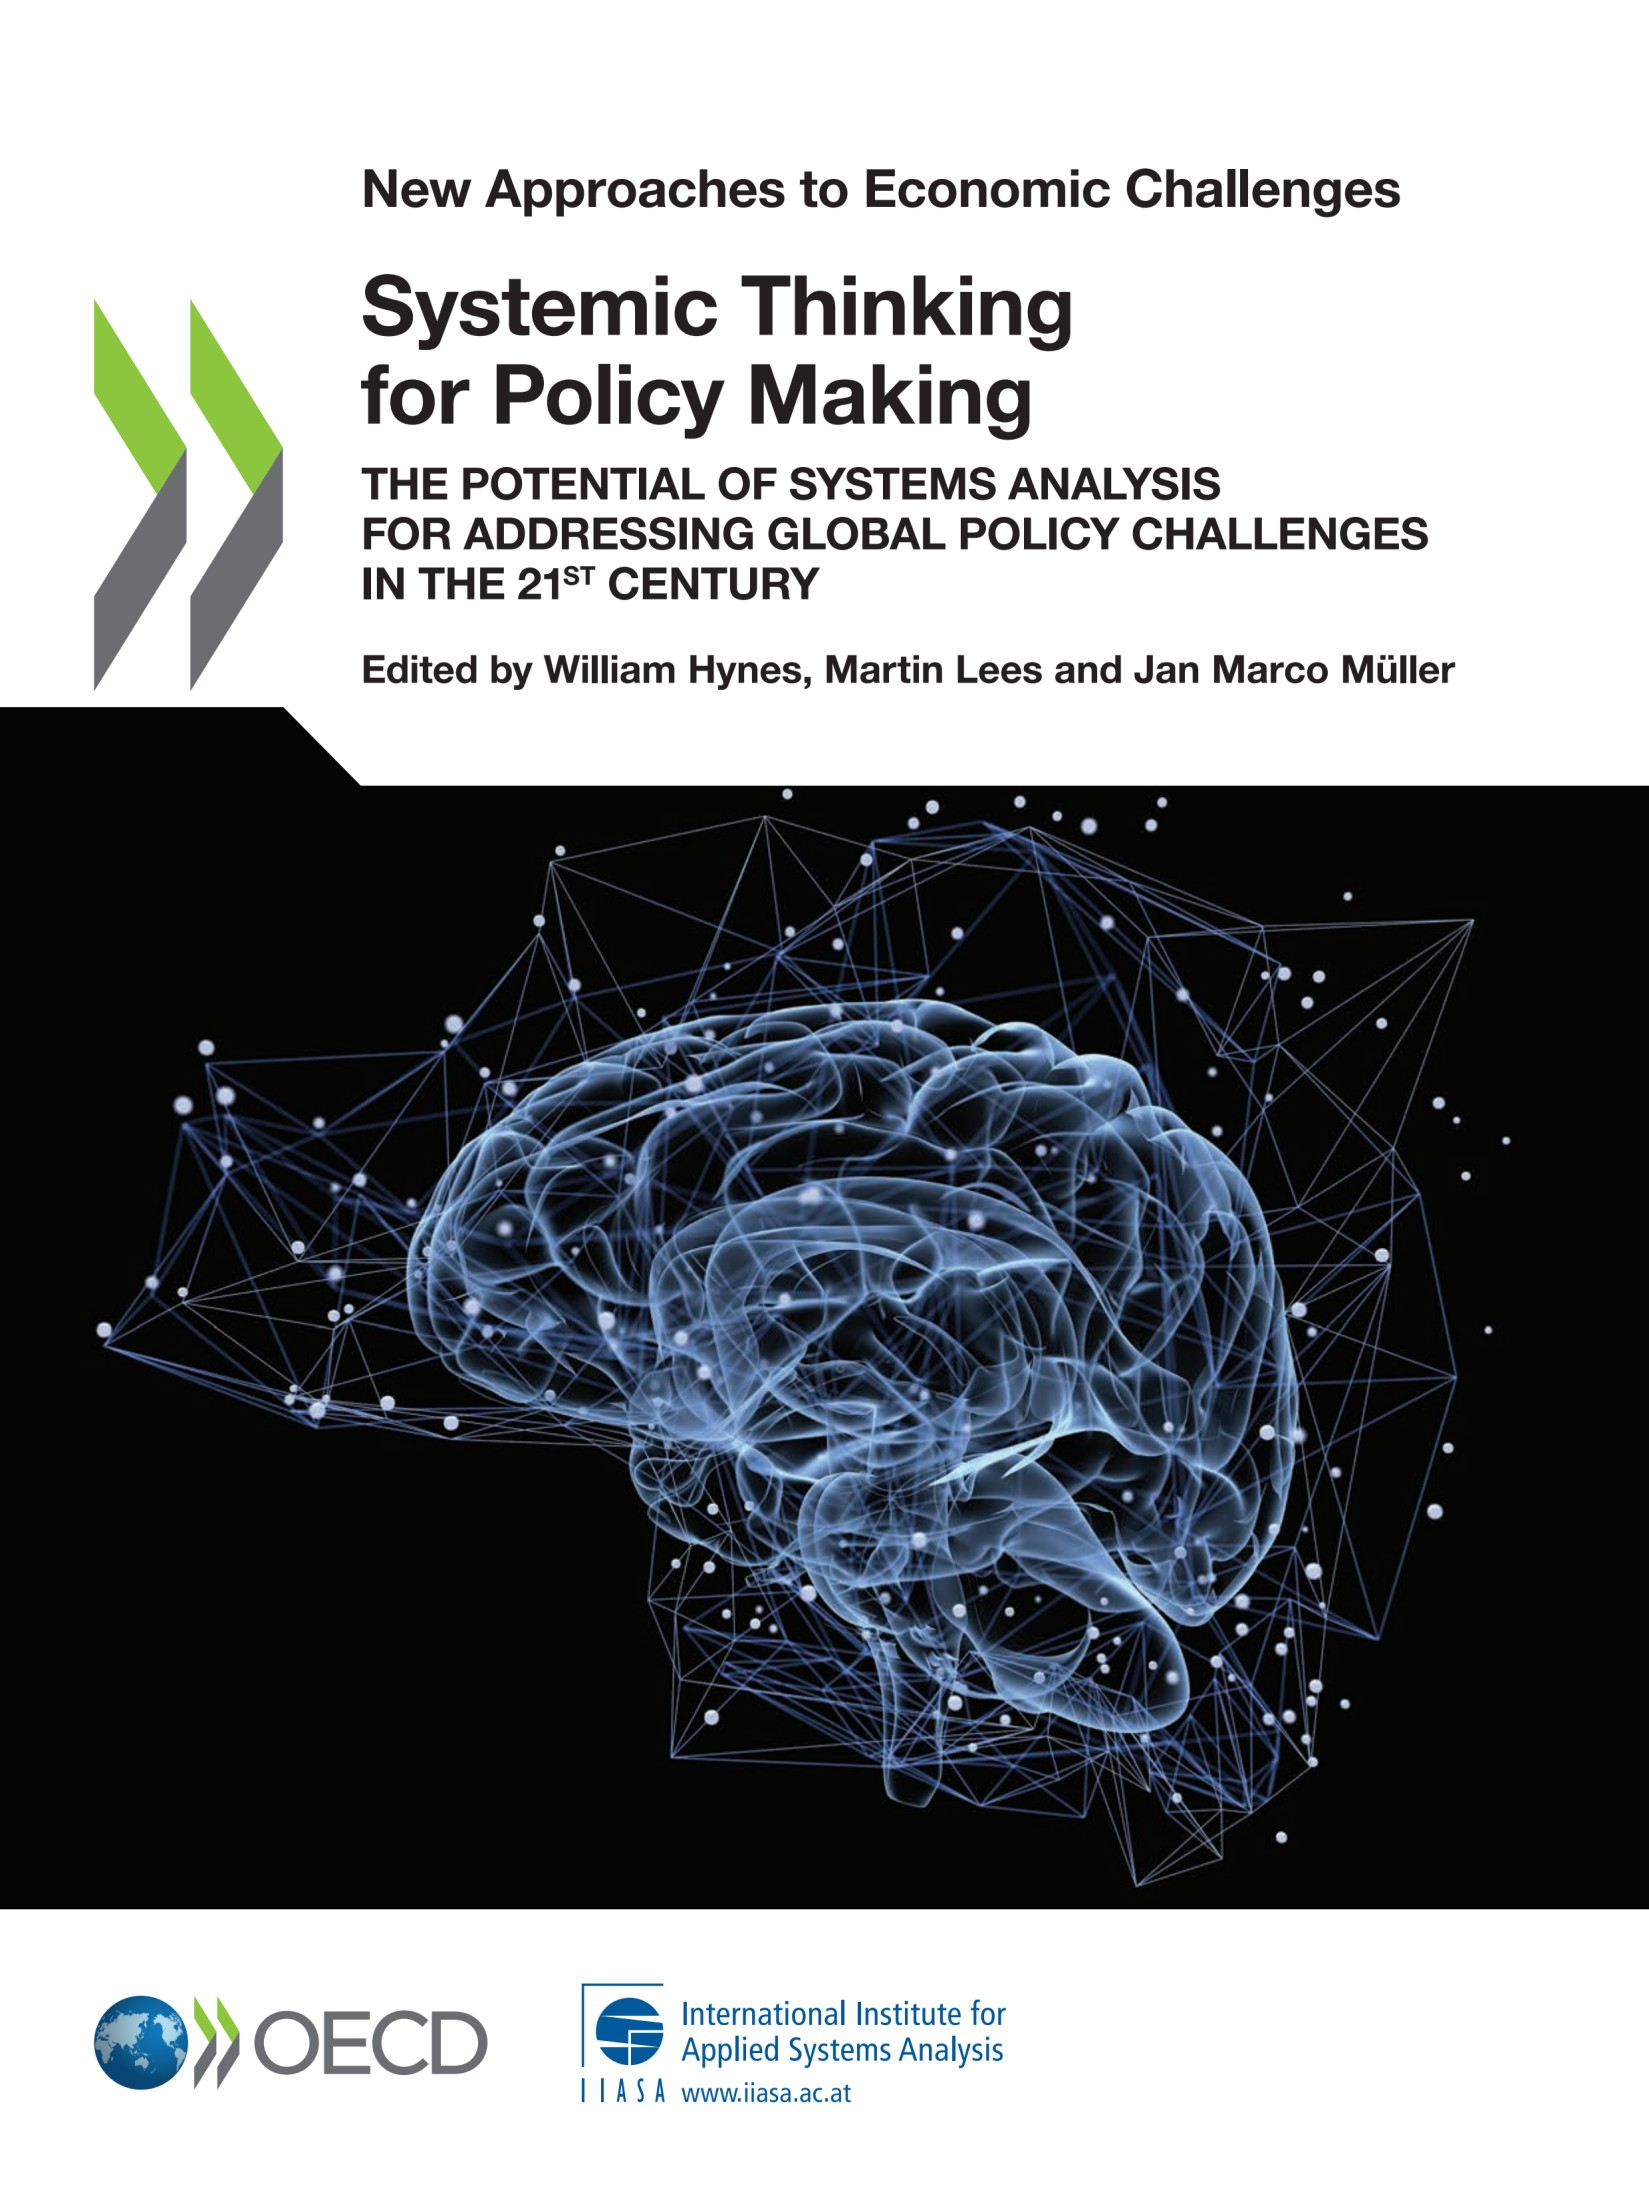 New Approaches to Economic Challenges Systemic Thinking for Policy Making The Potential of Systems Analysis for Addressing Global Policy Challenges in the 21st Century